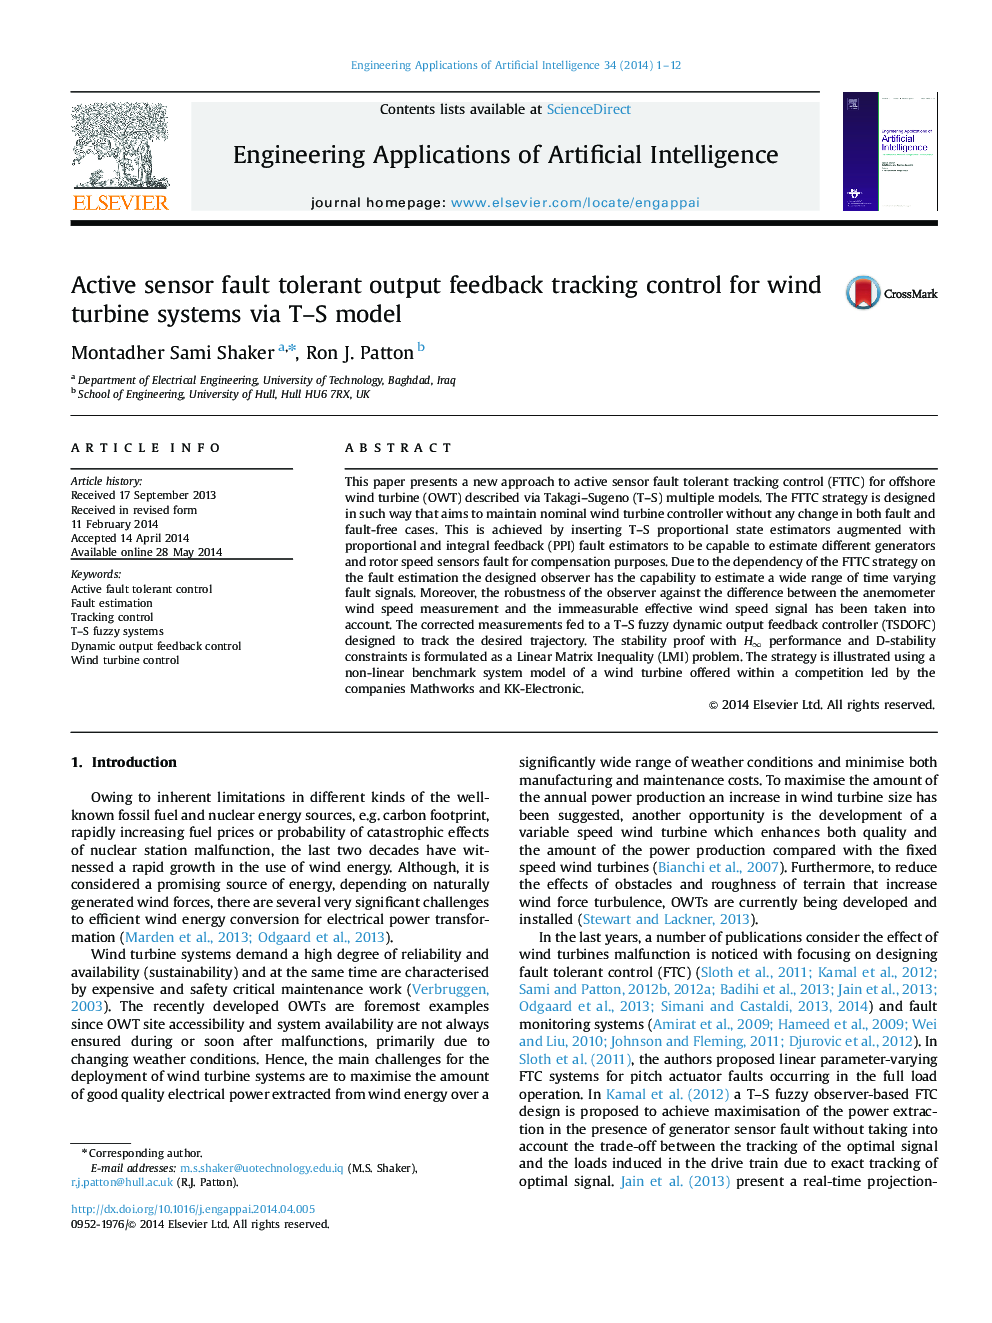 Active sensor fault tolerant output feedback tracking control for wind turbine systems via T–S model